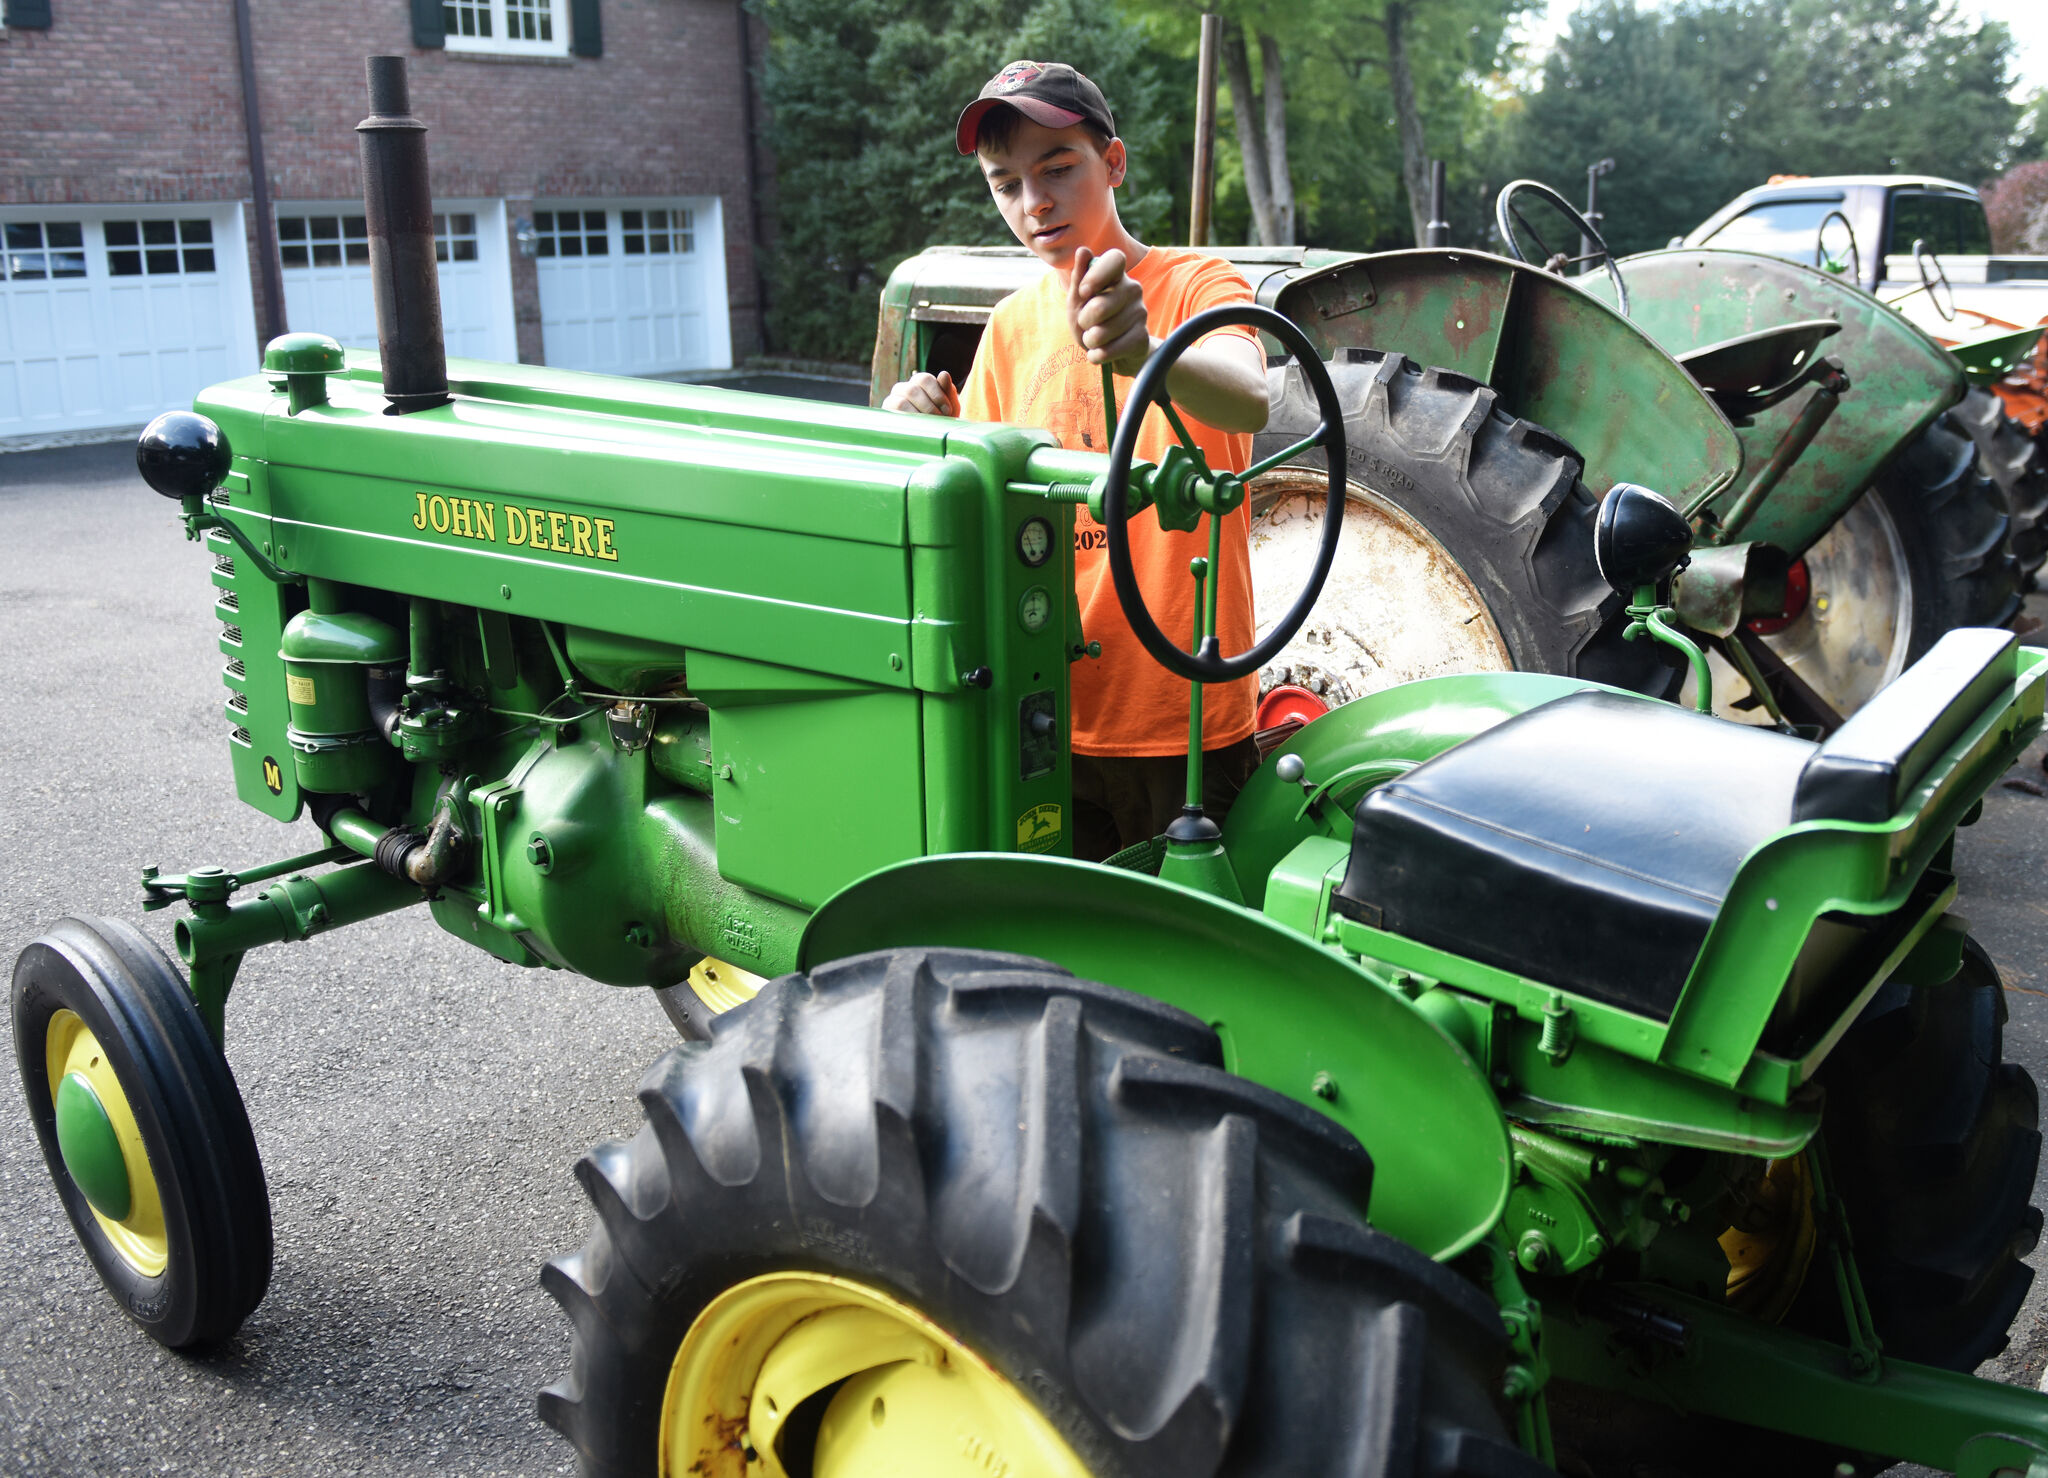 Modified John Deere makes tracks as world's first ammonia-fueled tractor